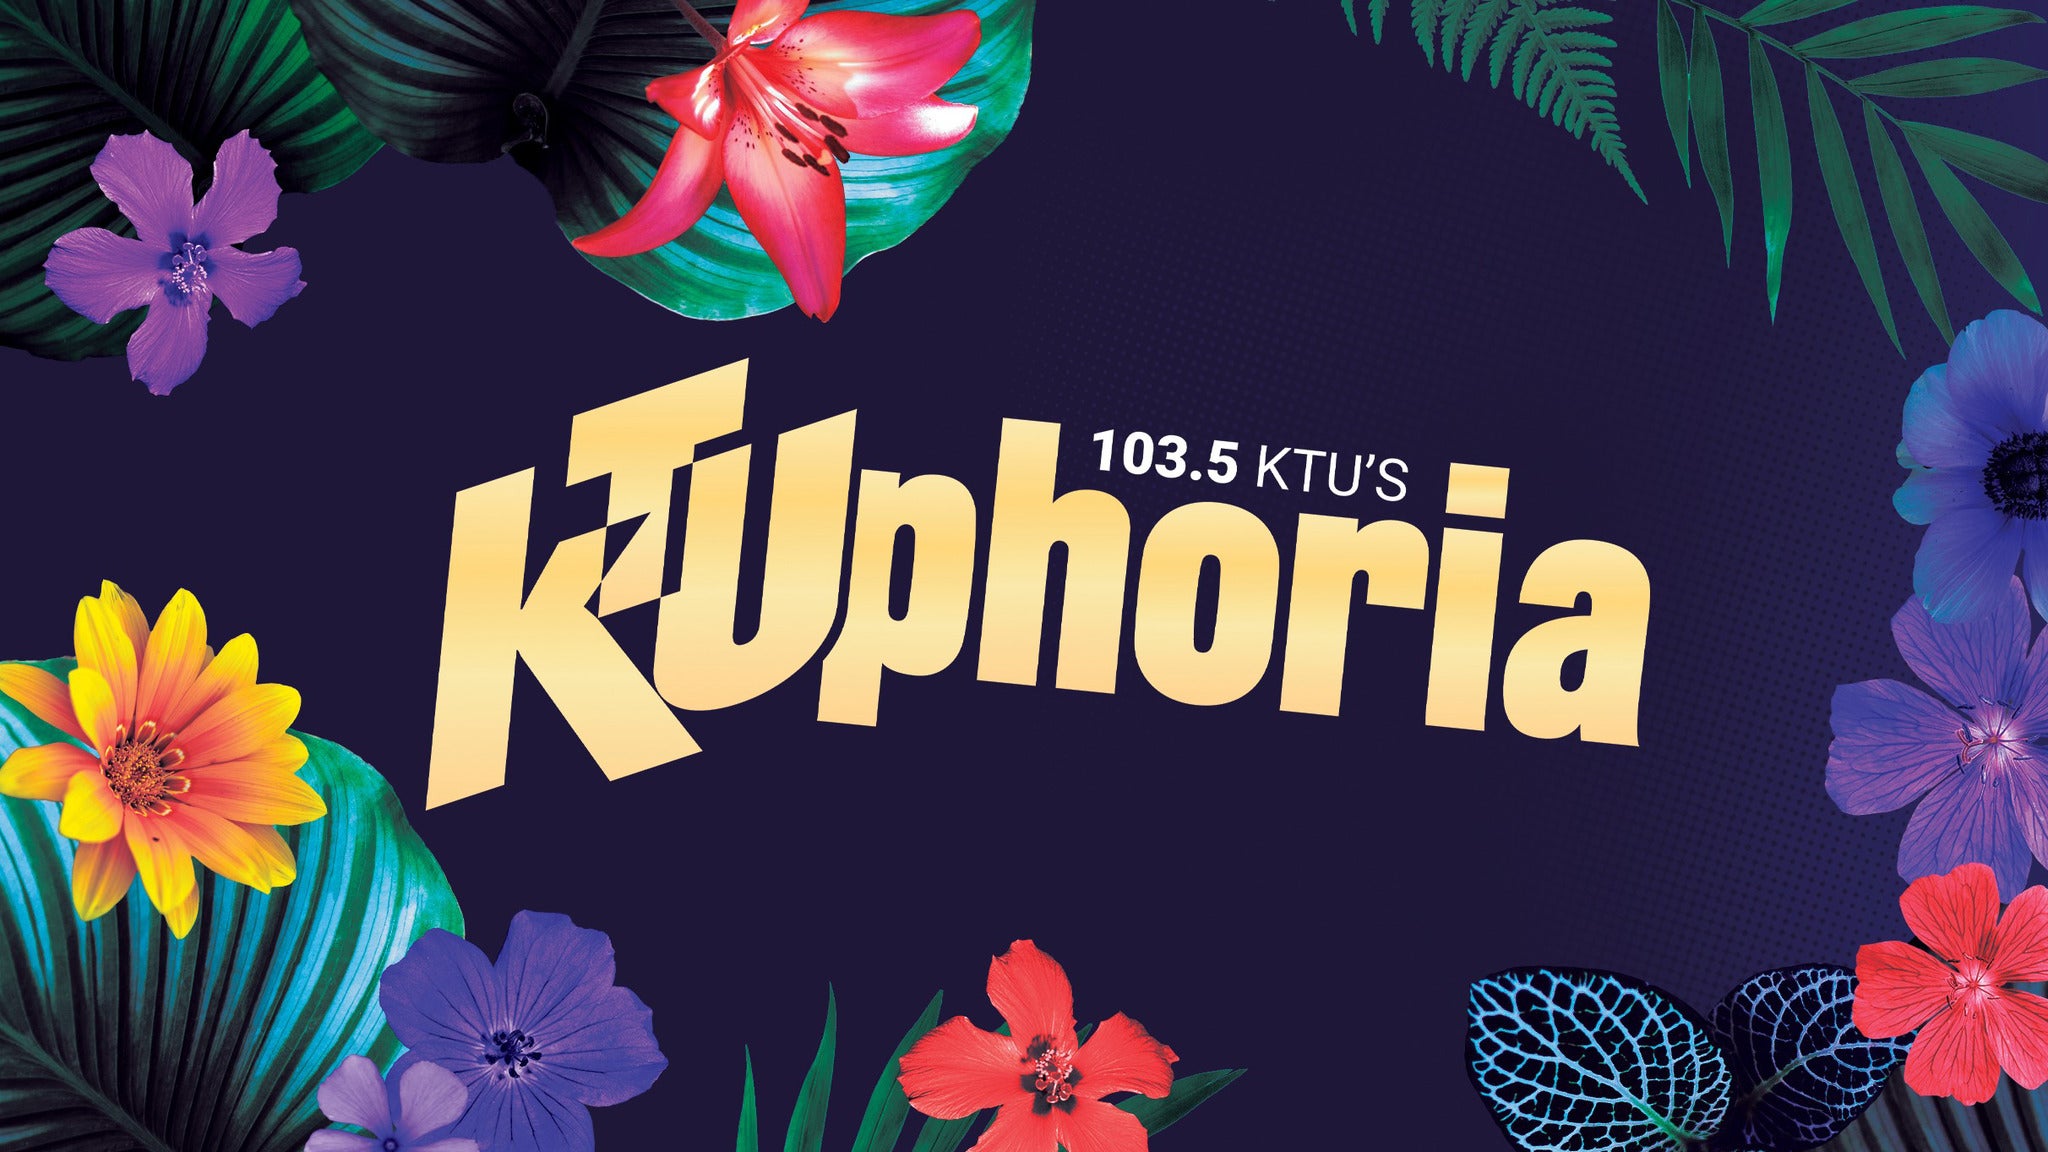 103.5 KTUphoria presale code for concert tickets in Wantagh, NY (Northwell Health at Jones Beach Theater)